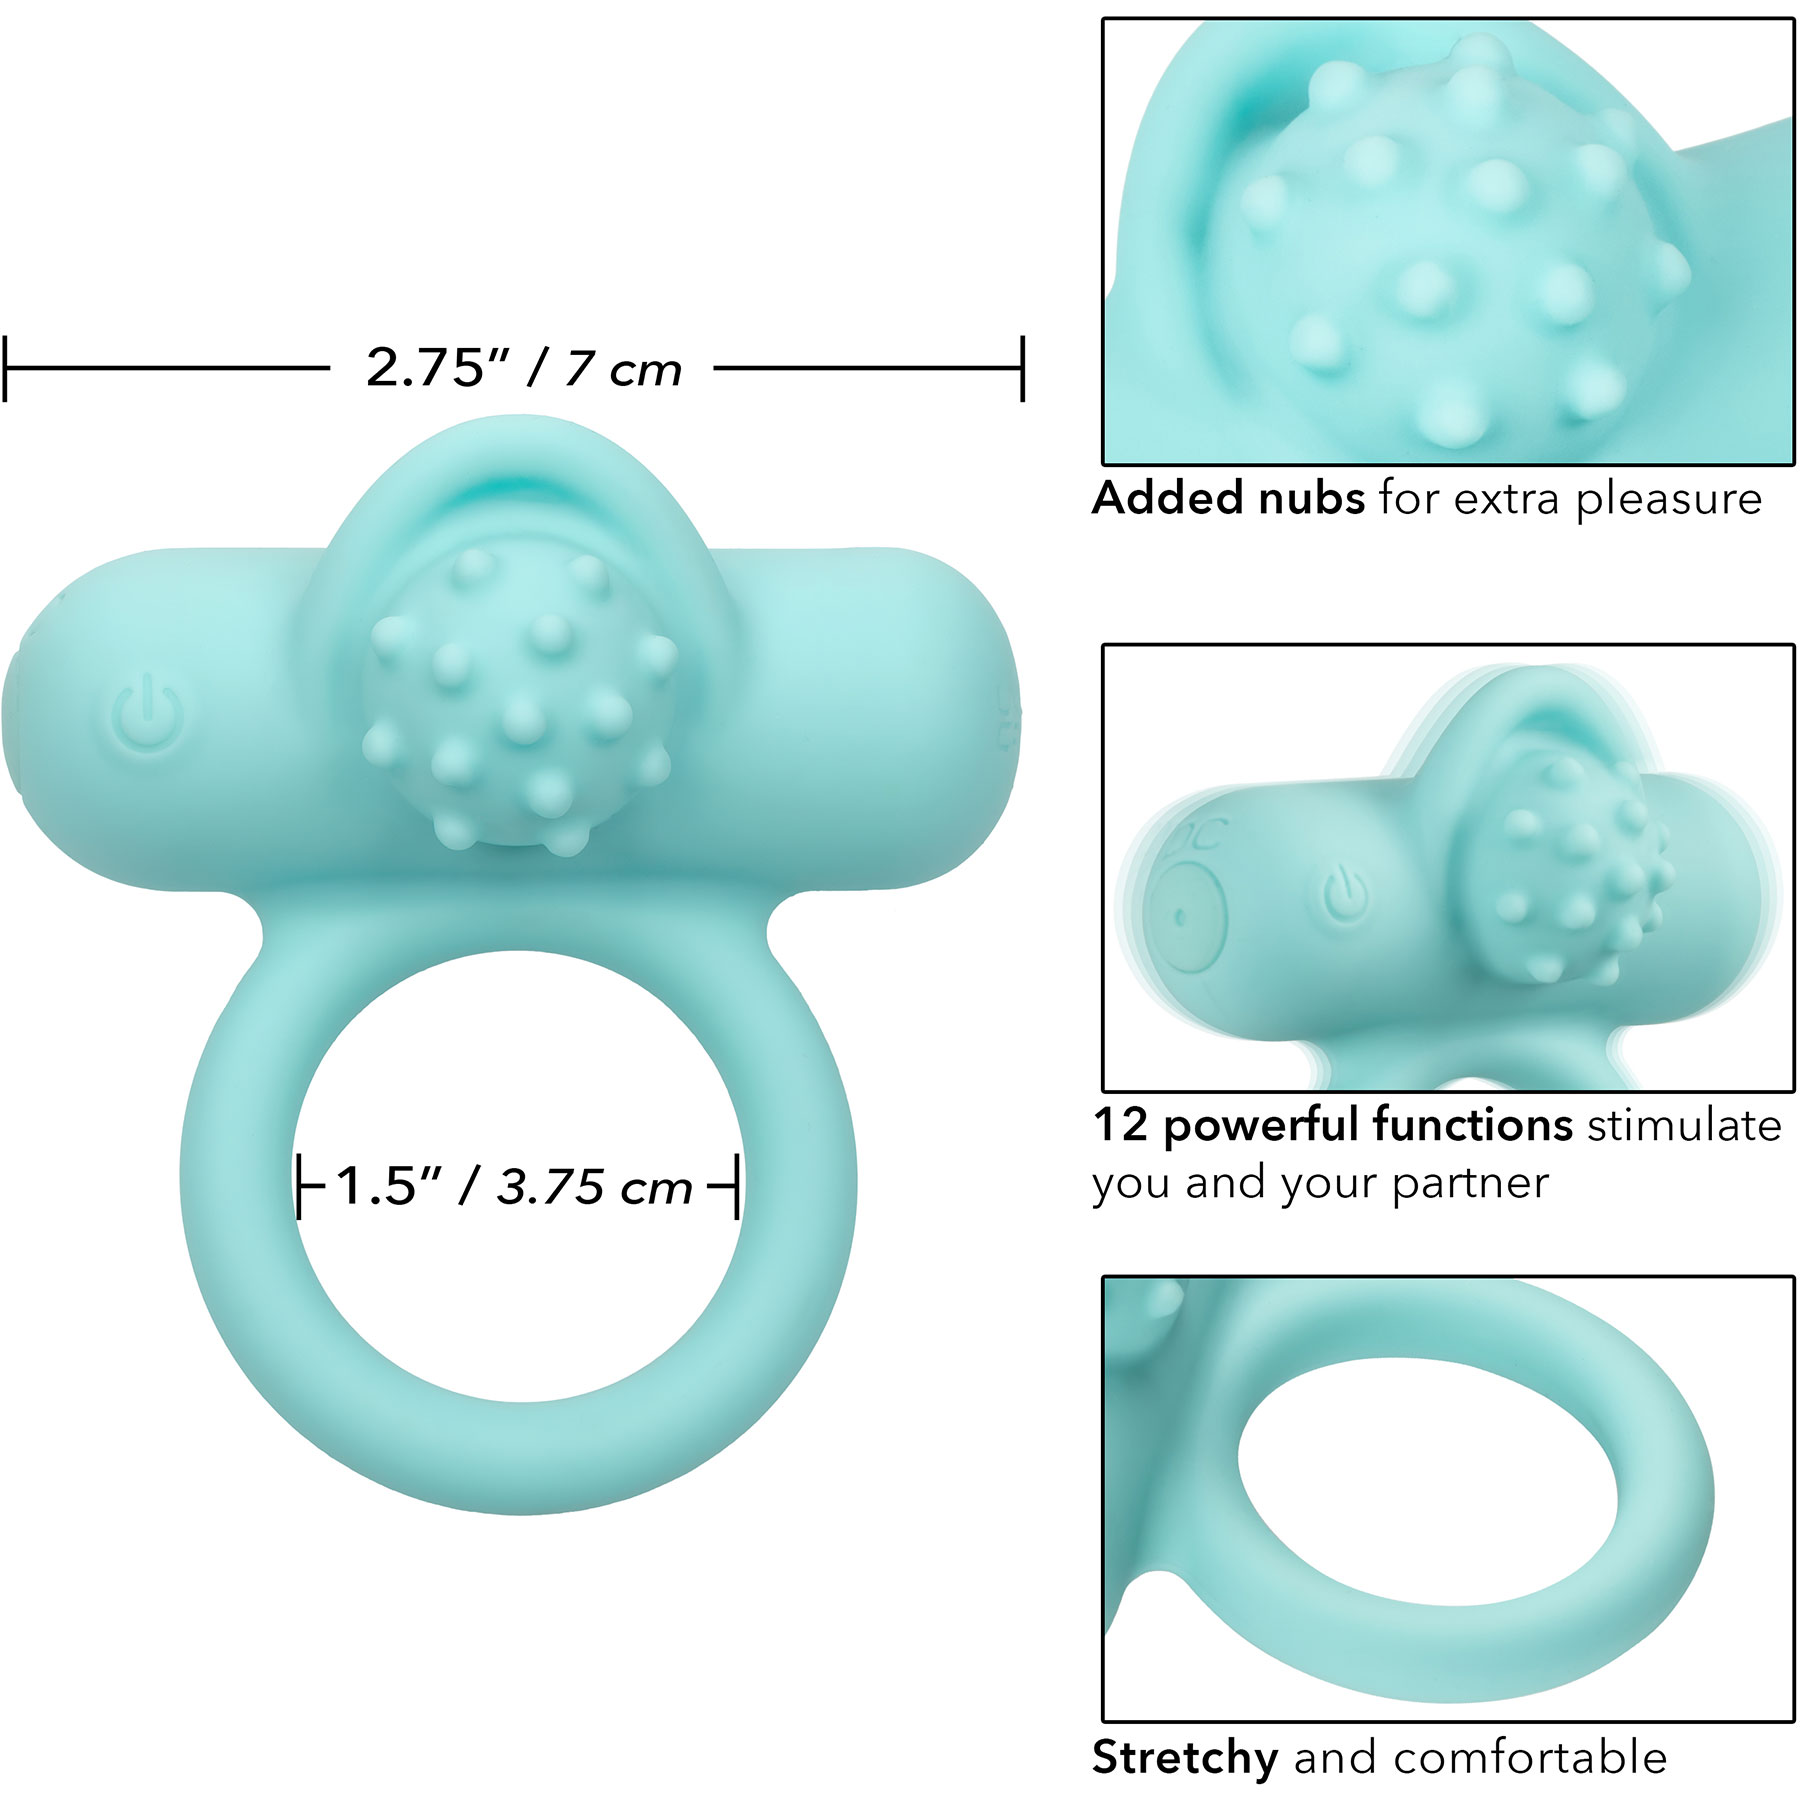 Silicone Rechargeable Nubby Lover's Delight Vibrating Cock Ring - Measurements